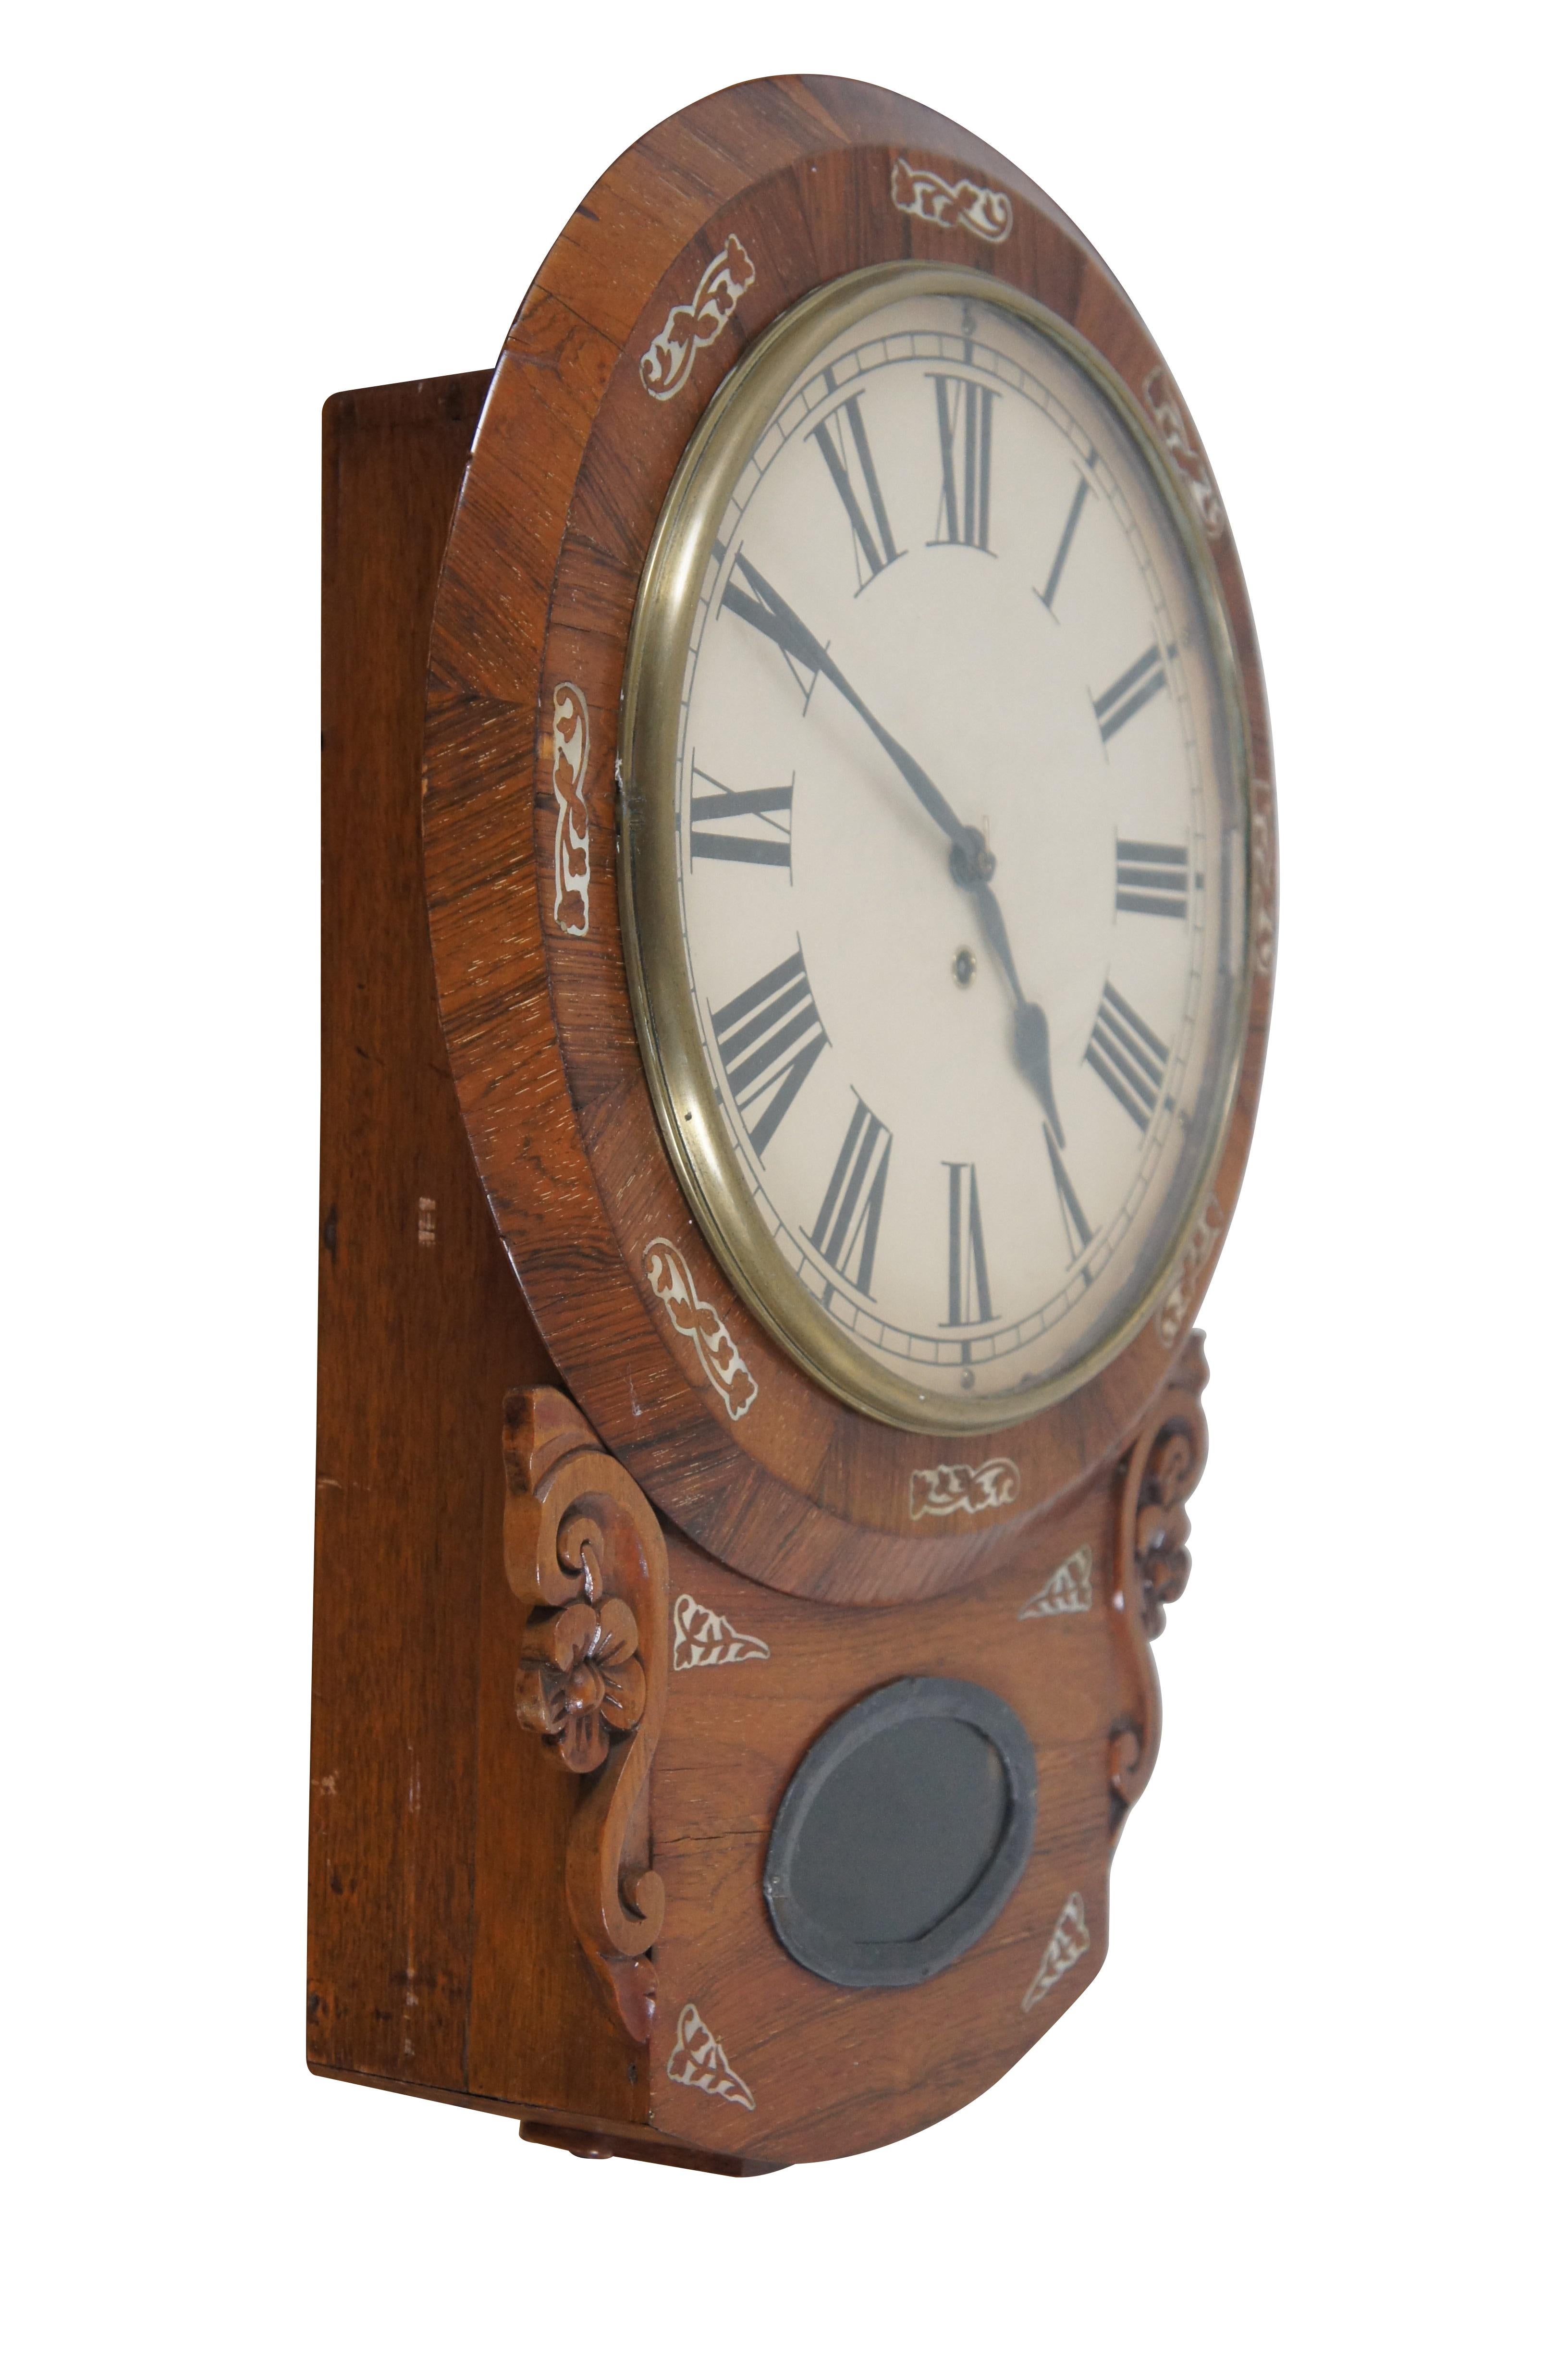 Antique short drop wall clock featuring a round beveled frame accented with inlaid mother of pearl cut-out leaf designs. The drop features an oval peekaboo window framed in black metal, showing the brass pendulum inside. Flanked by carved scrolls